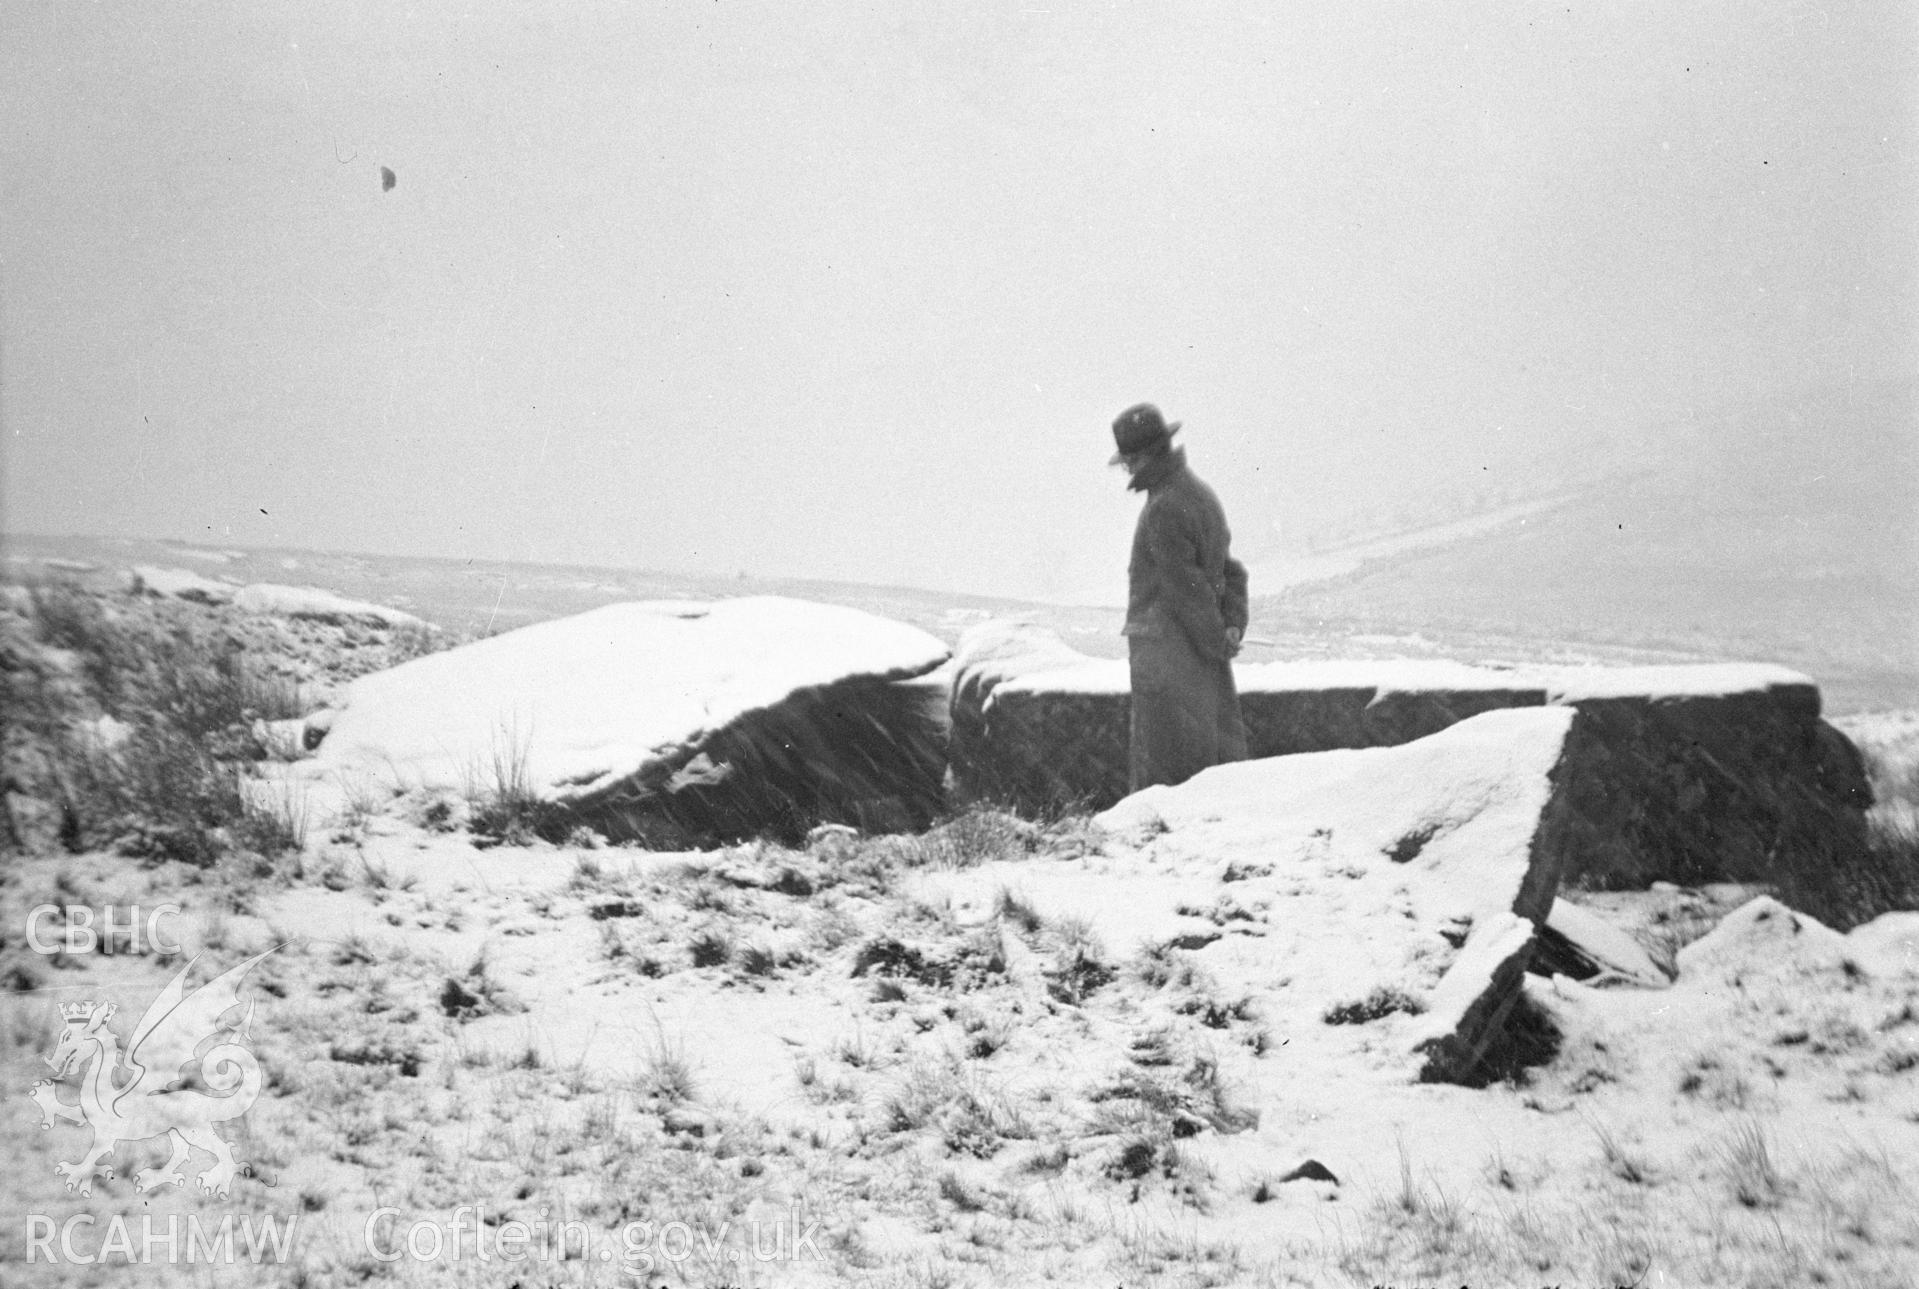 Digital copy of a nitrate negative showing view of Carn Flechart Stone Circle and Chambered Barrow.